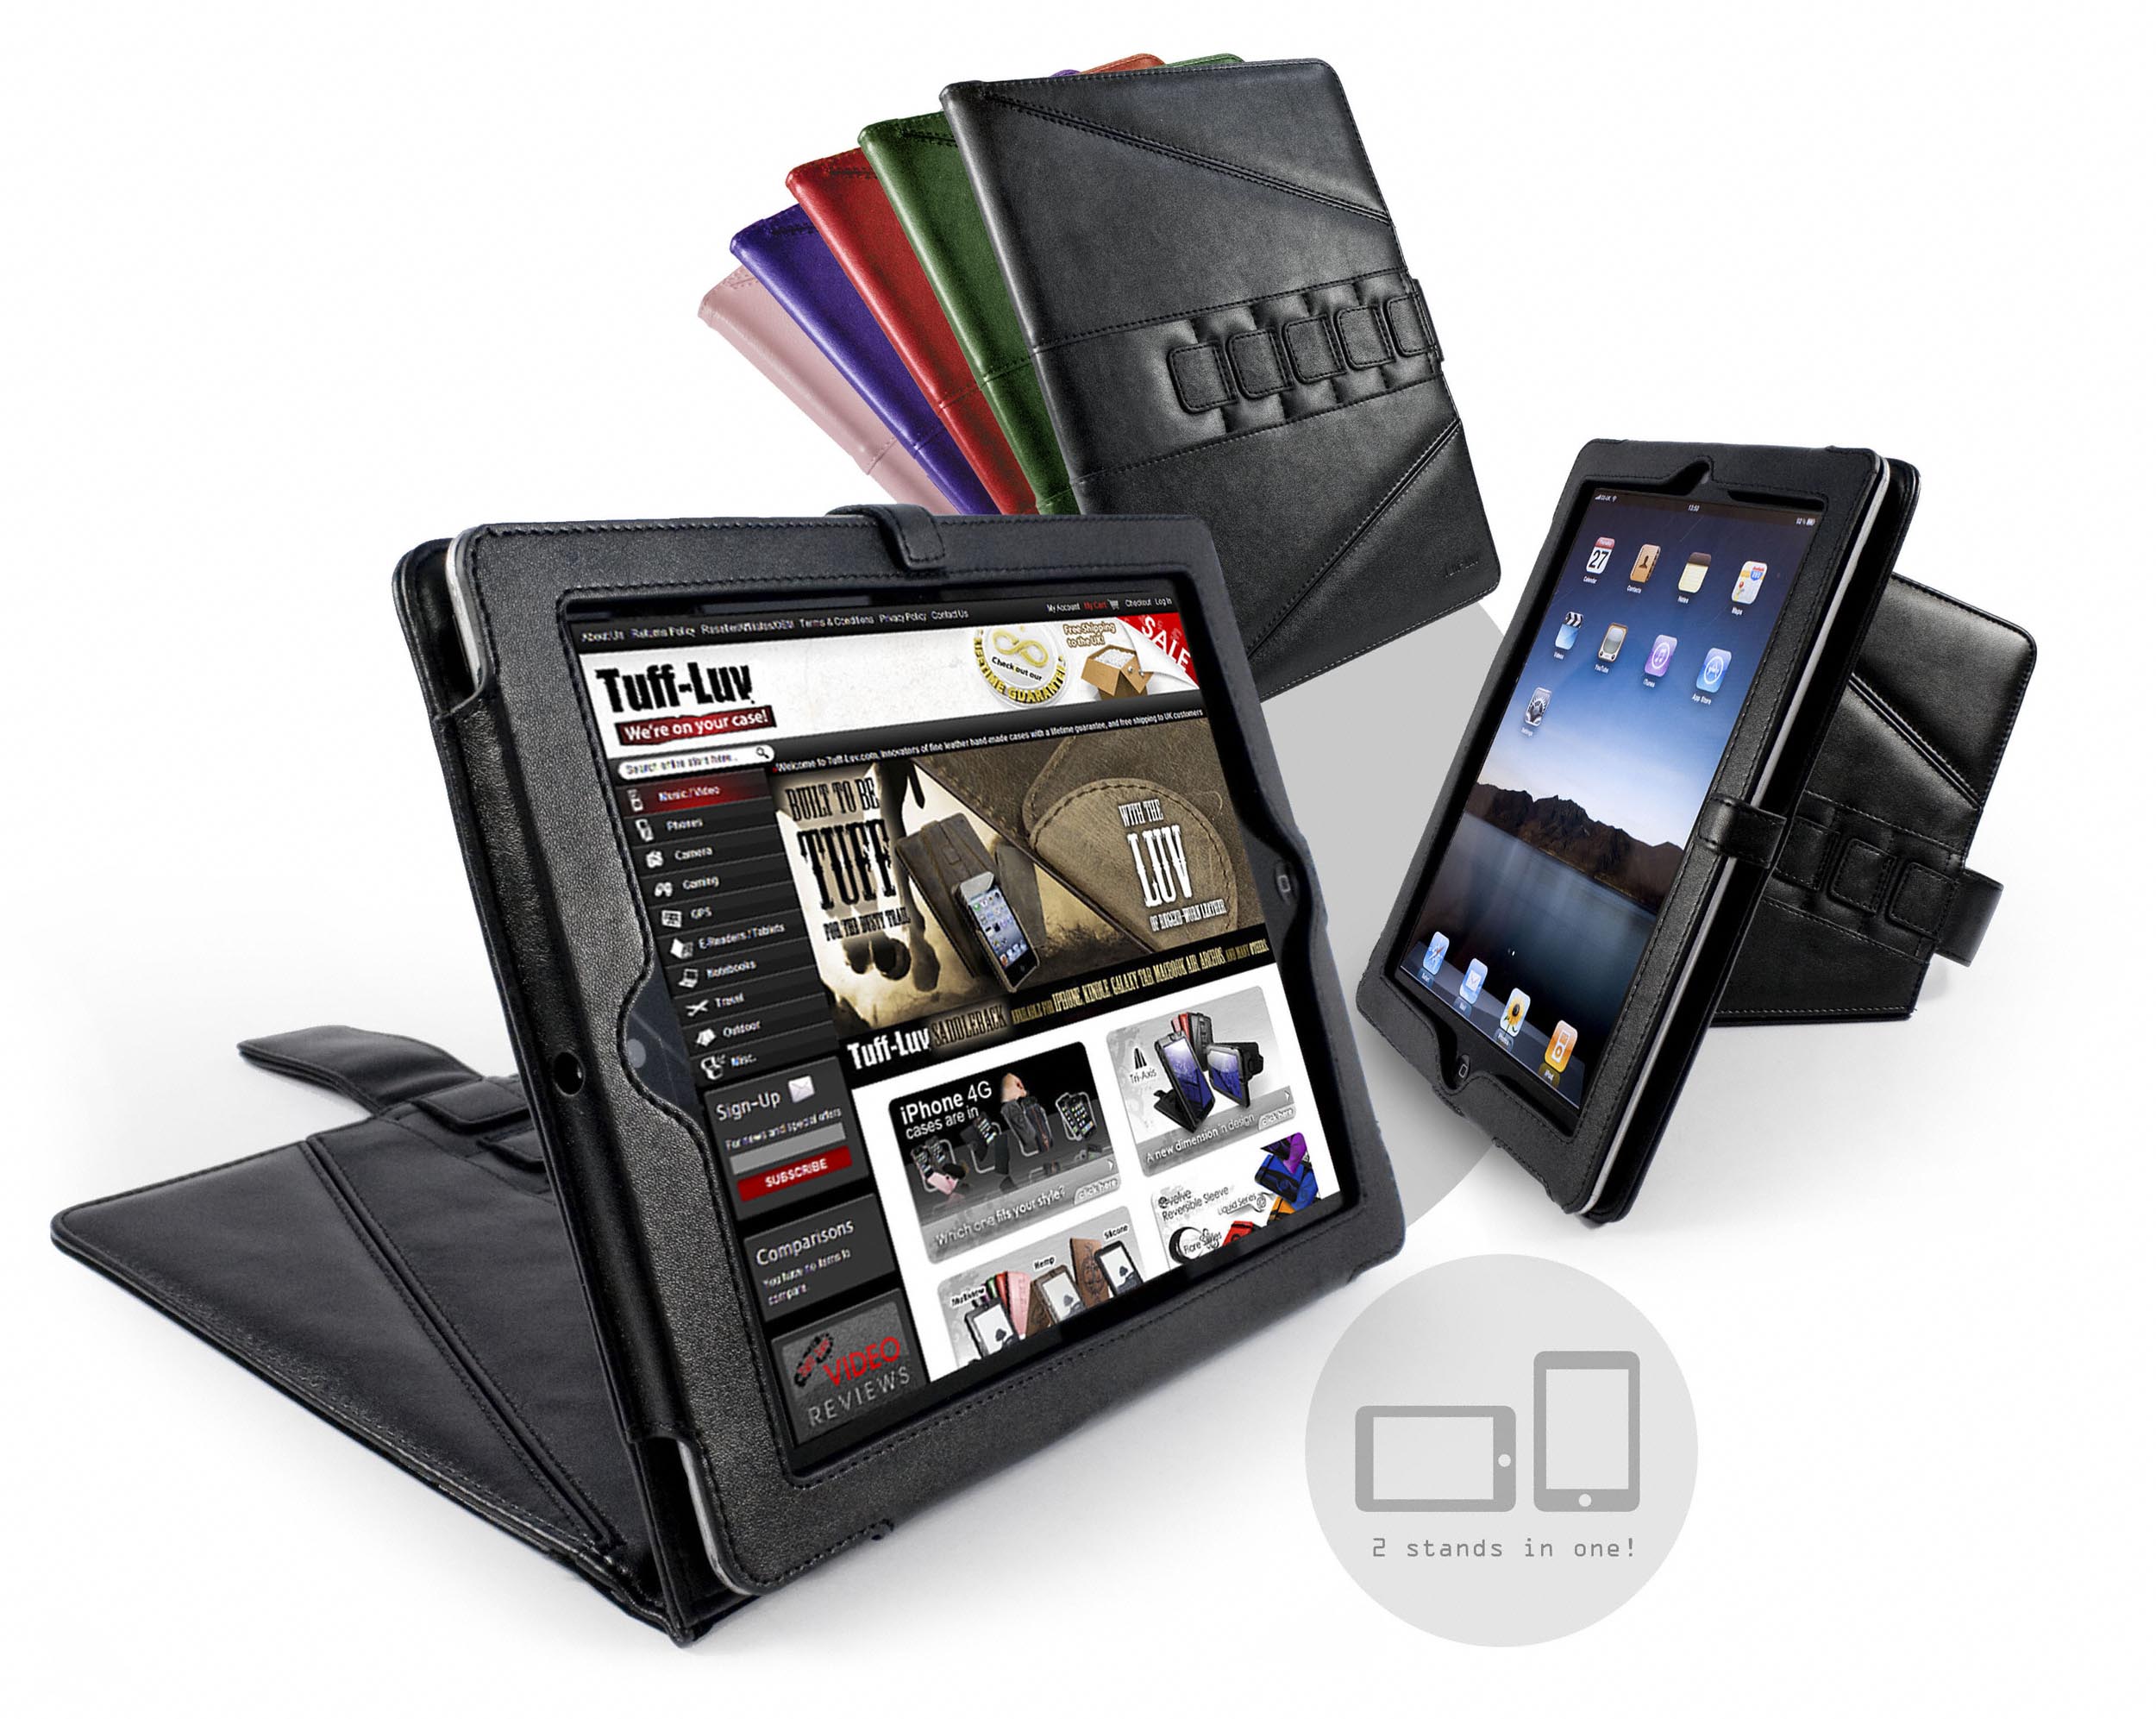 Ipad 2 Cases And Covers Ebay